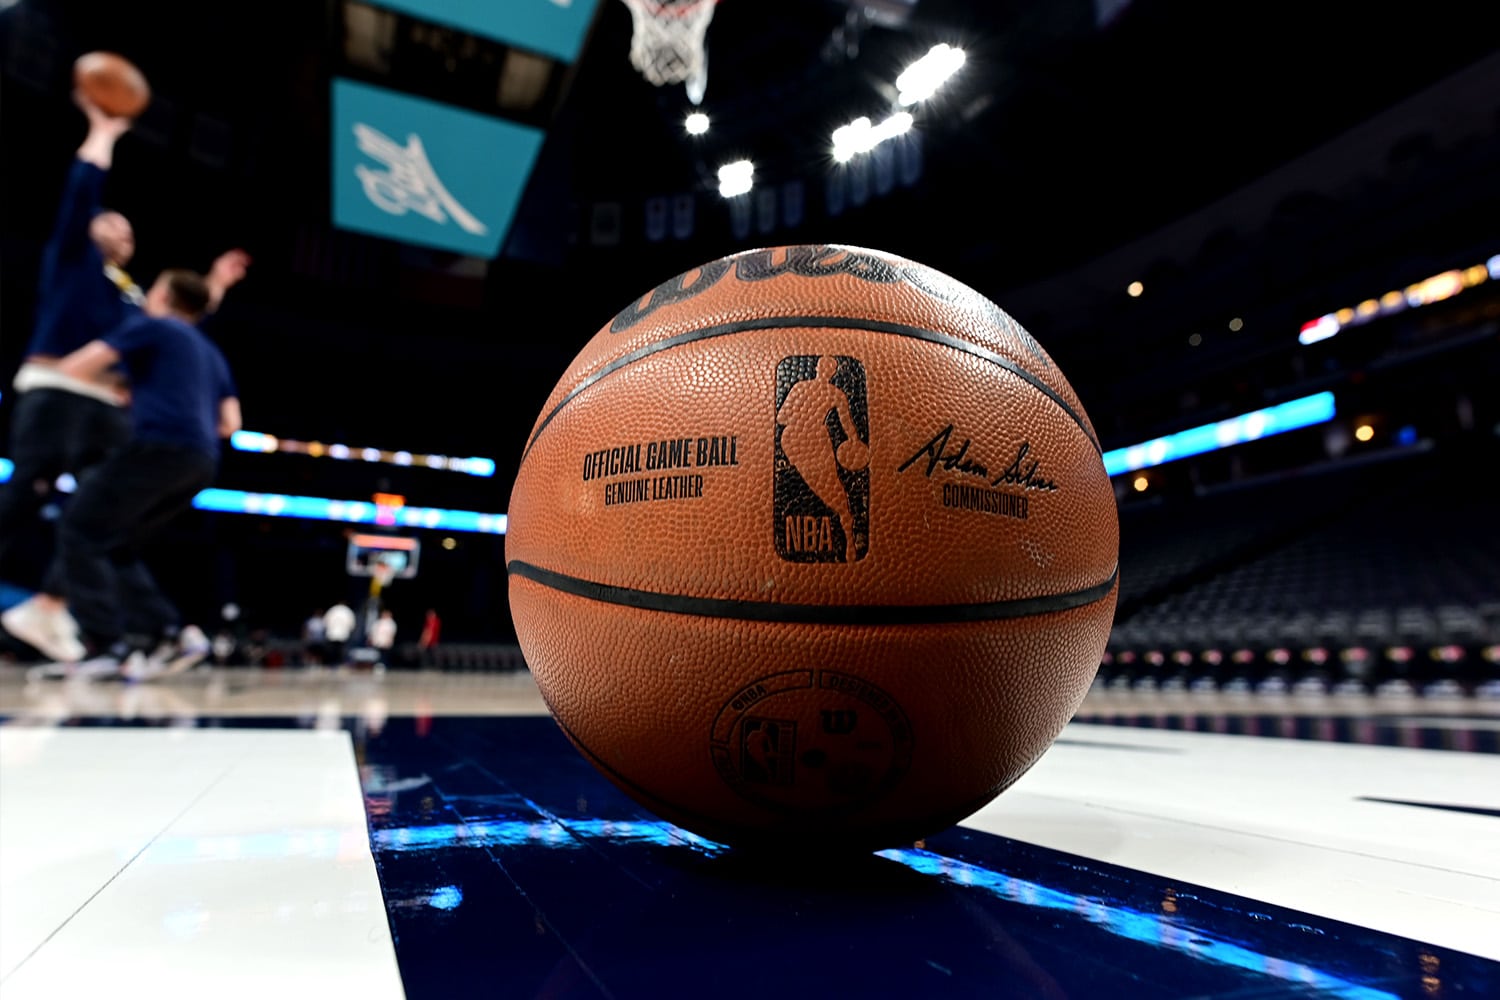 A general view of an NBA basketball before a game.